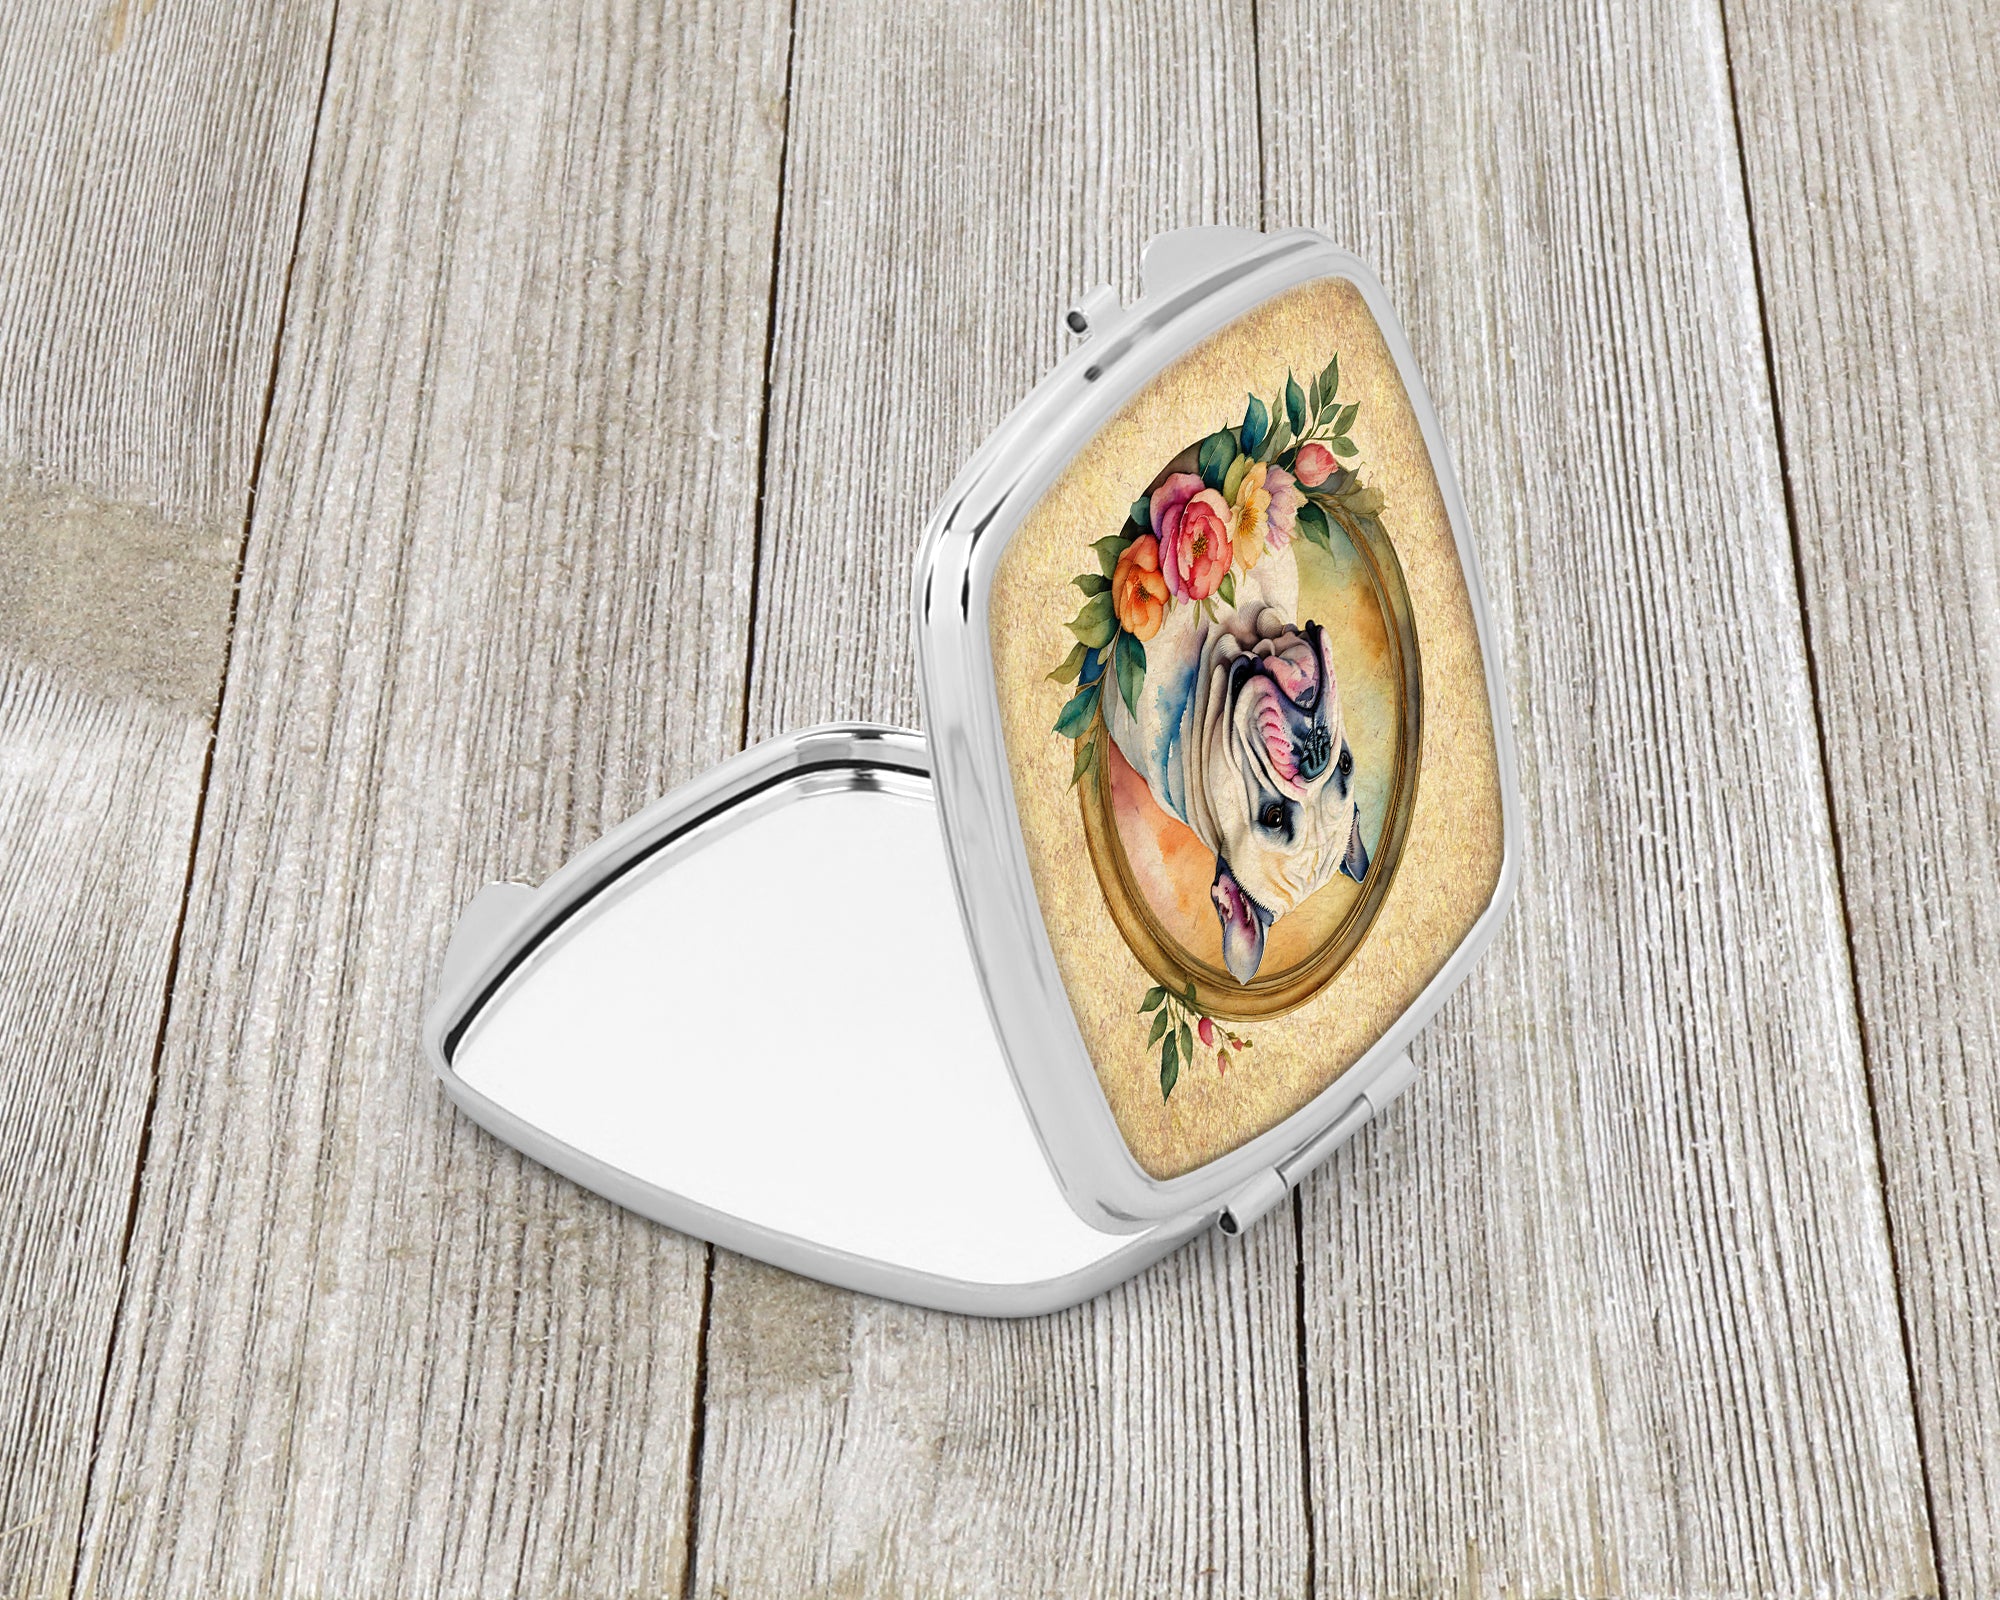 Buy this English Bulldog and Flowers Compact Mirror